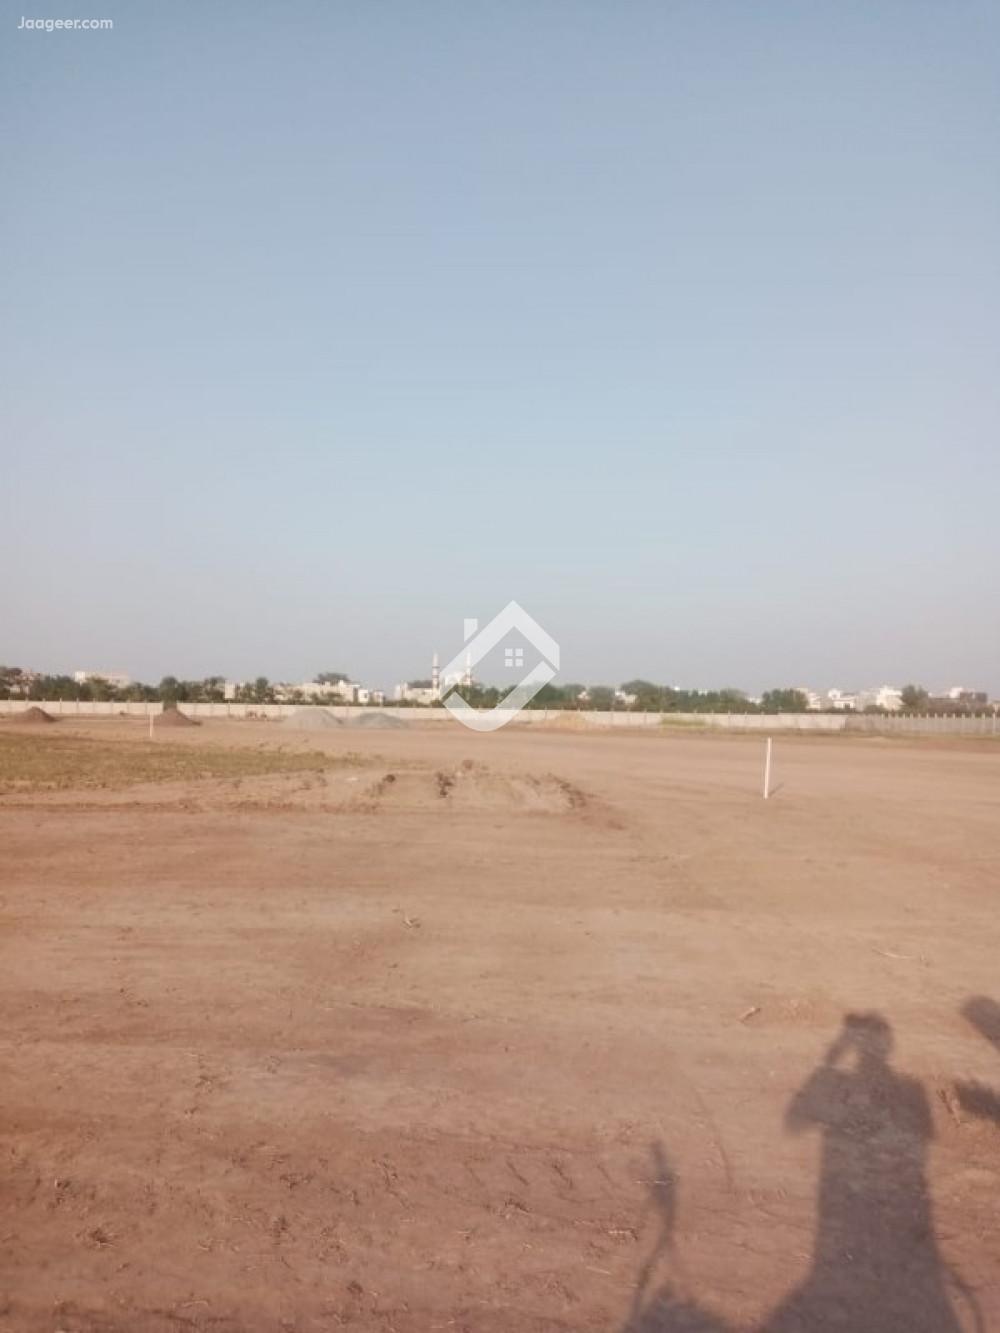 Main image 4 Marla Residential Plot For Sale In National City ------